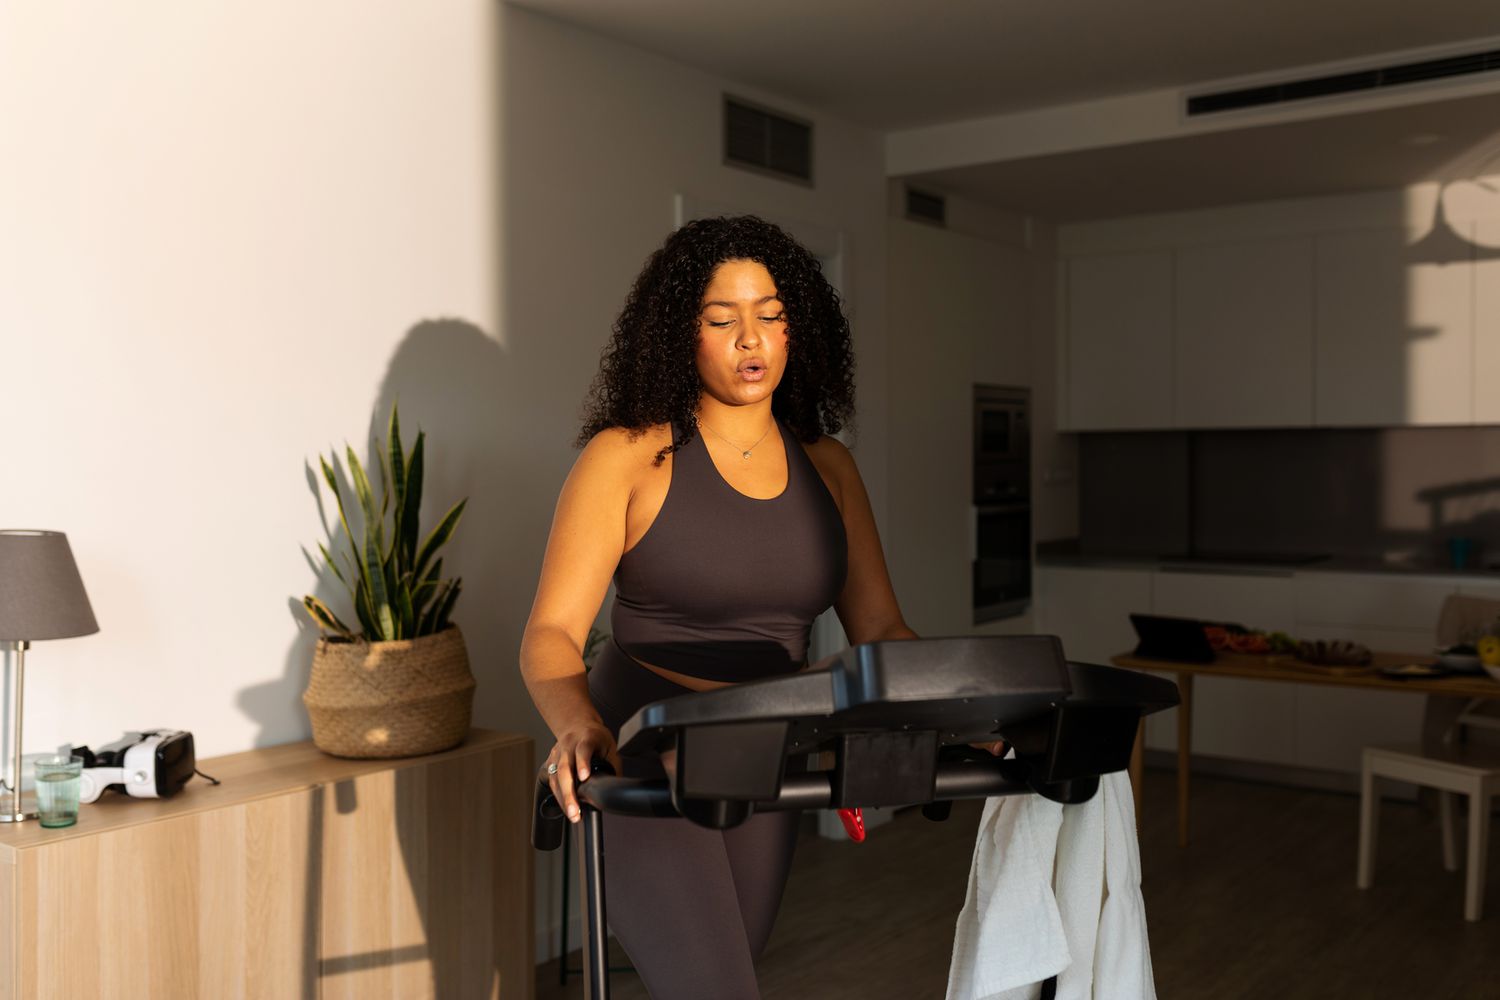 woman exercising in living room on treadmill